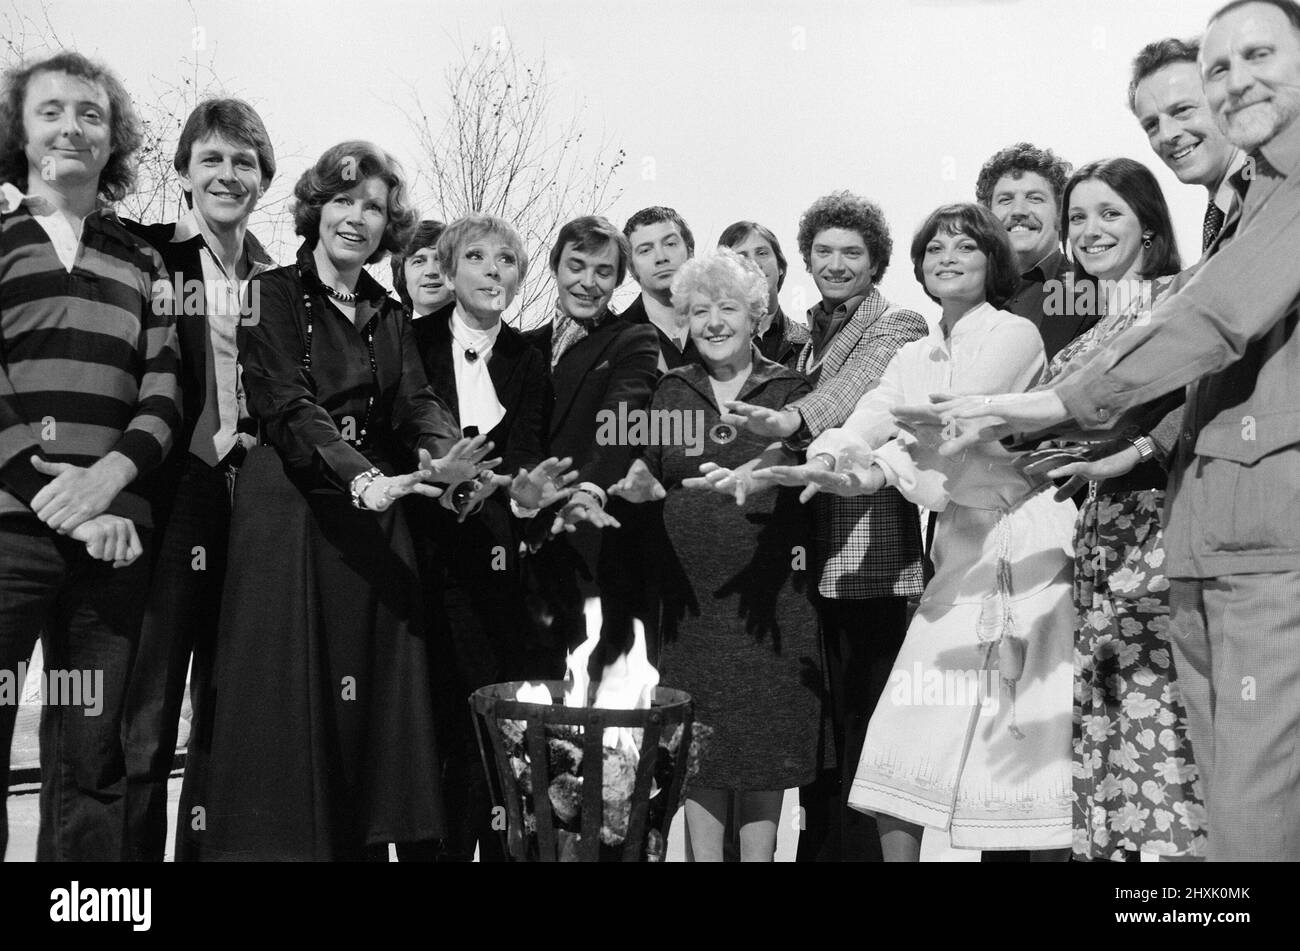 London Weekend Television photo-call to introduce some of the shows they will be presenting on television this Christmas, 12th December 1977. Our picture shows ... Jasper Carrot, Carl Wayne, Sarah Lawson, Melvin Bragg, Miriam Karlin, Barry Evans, Lewis Collins, Irene Handel, Christopher Blake, Martin Shaw, Francoise Pascal, Colin Welland, Emily Richard, Bernard Horsfall and Alfred Burke. Stock Photo